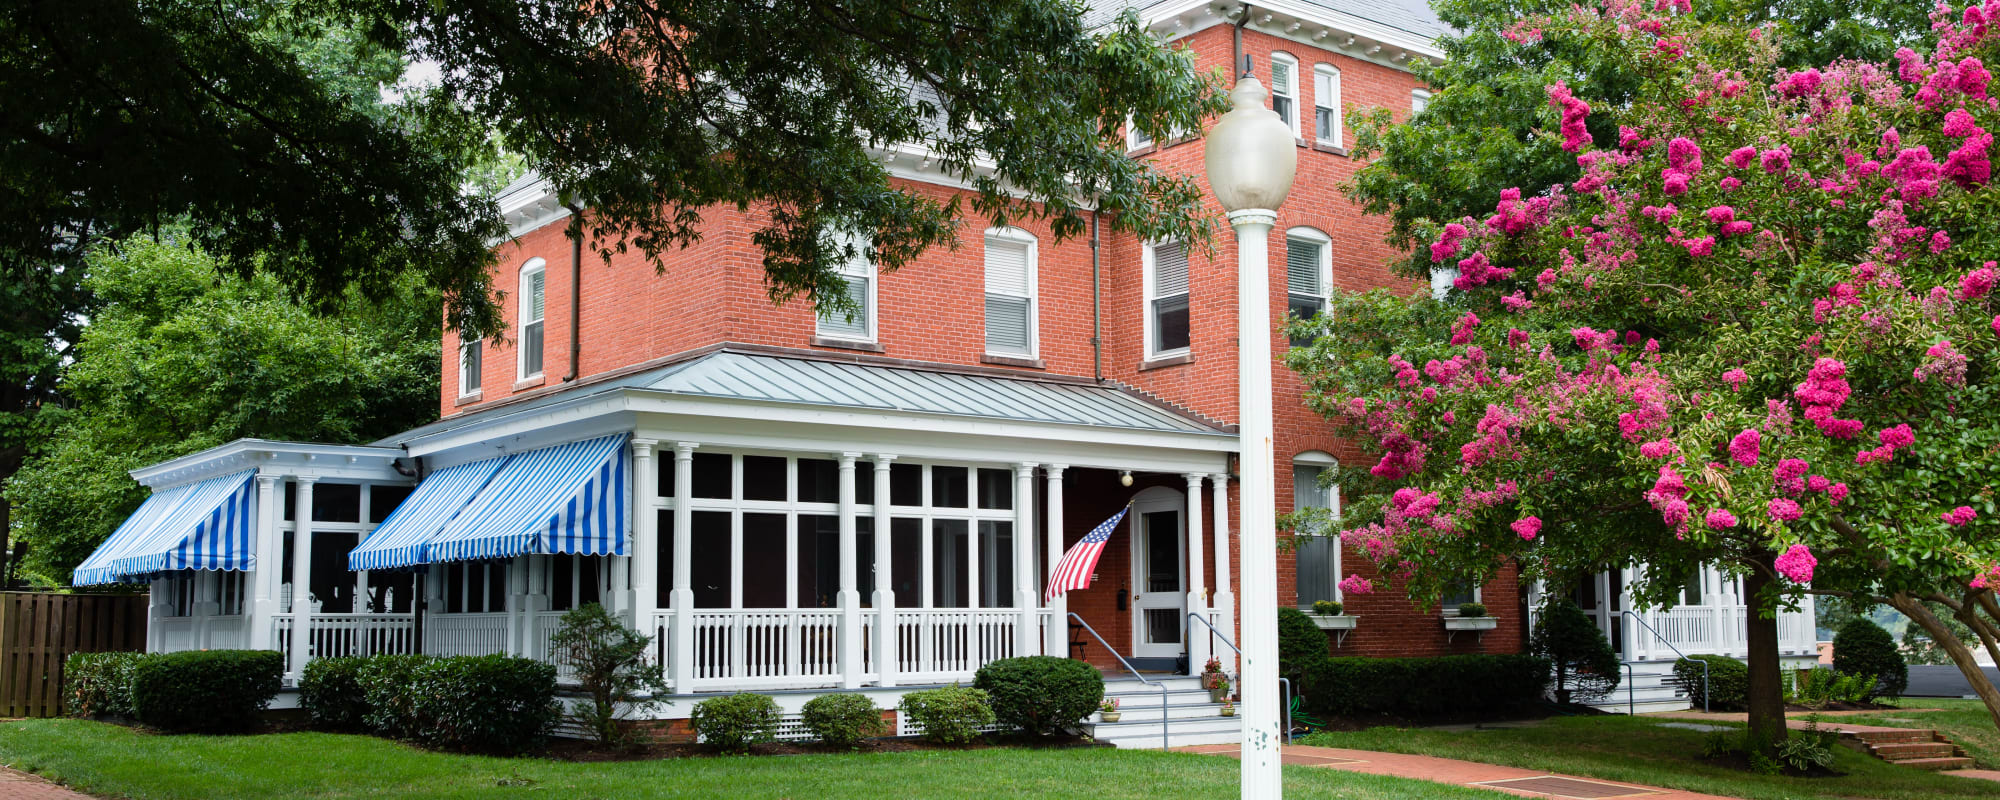 Exterior view of a home at Upshur/Rodgers in Annapolis, Maryland